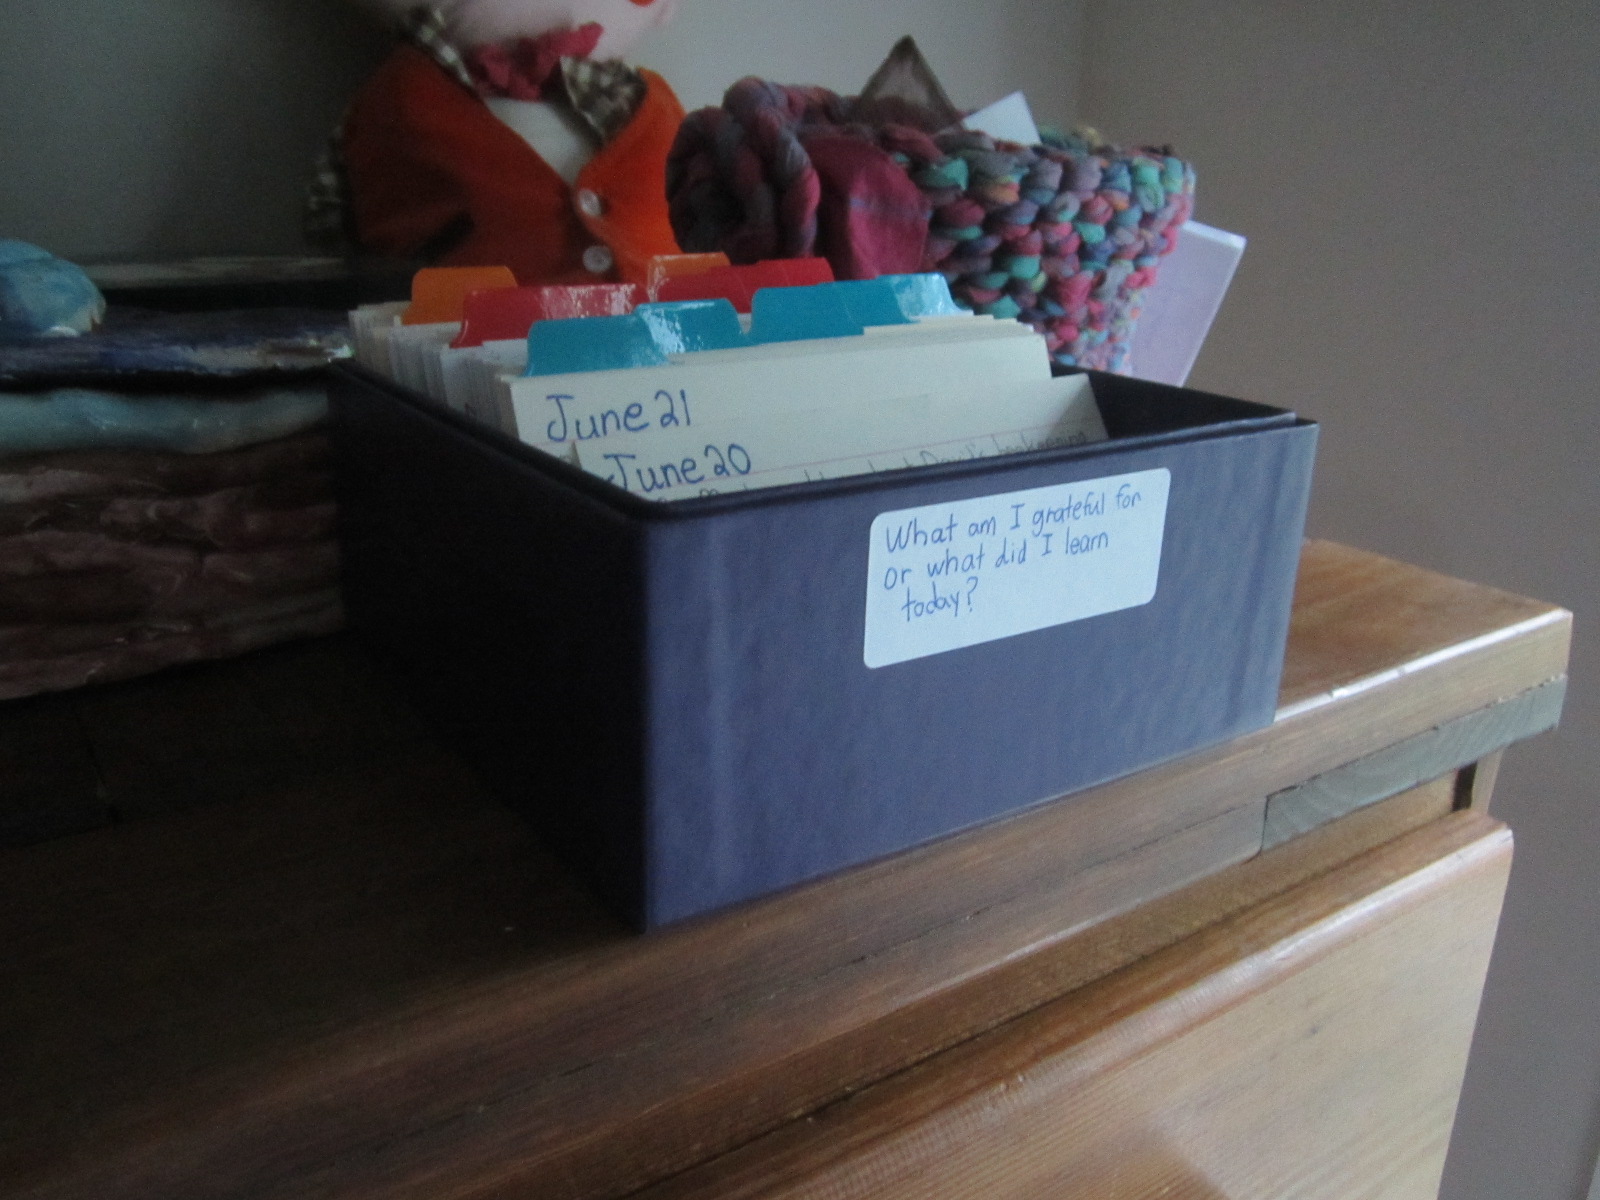 My Daily Gratitude Journal in a Box